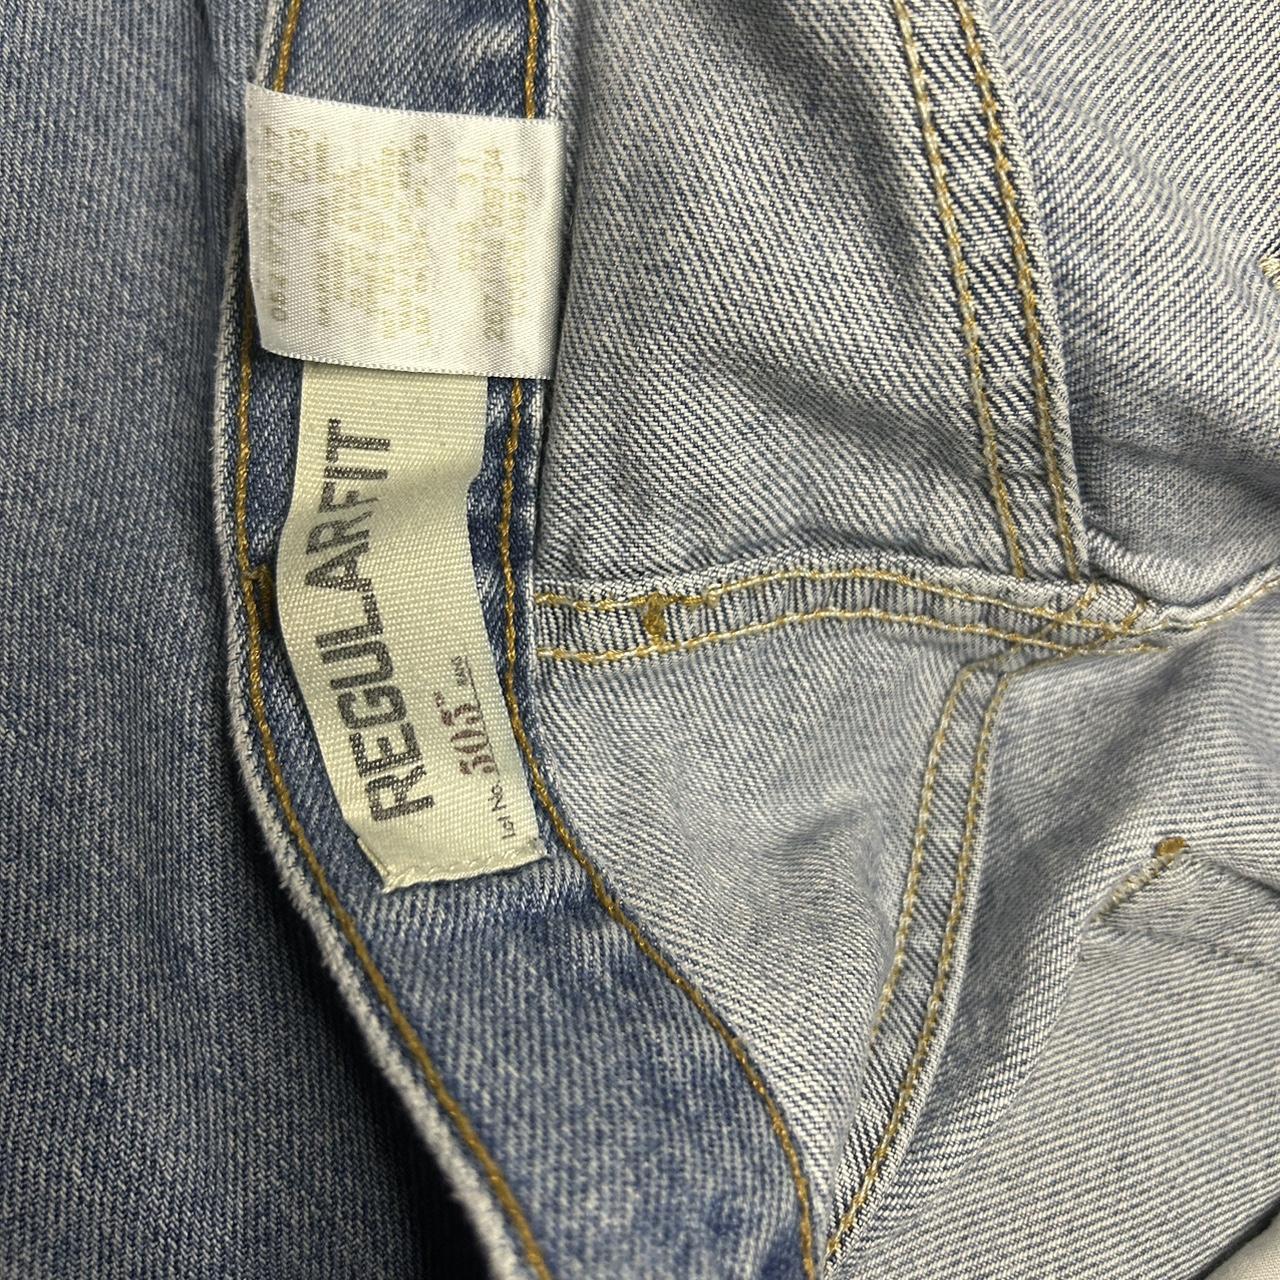 Levi's Men's Blue and White Jeans (4)